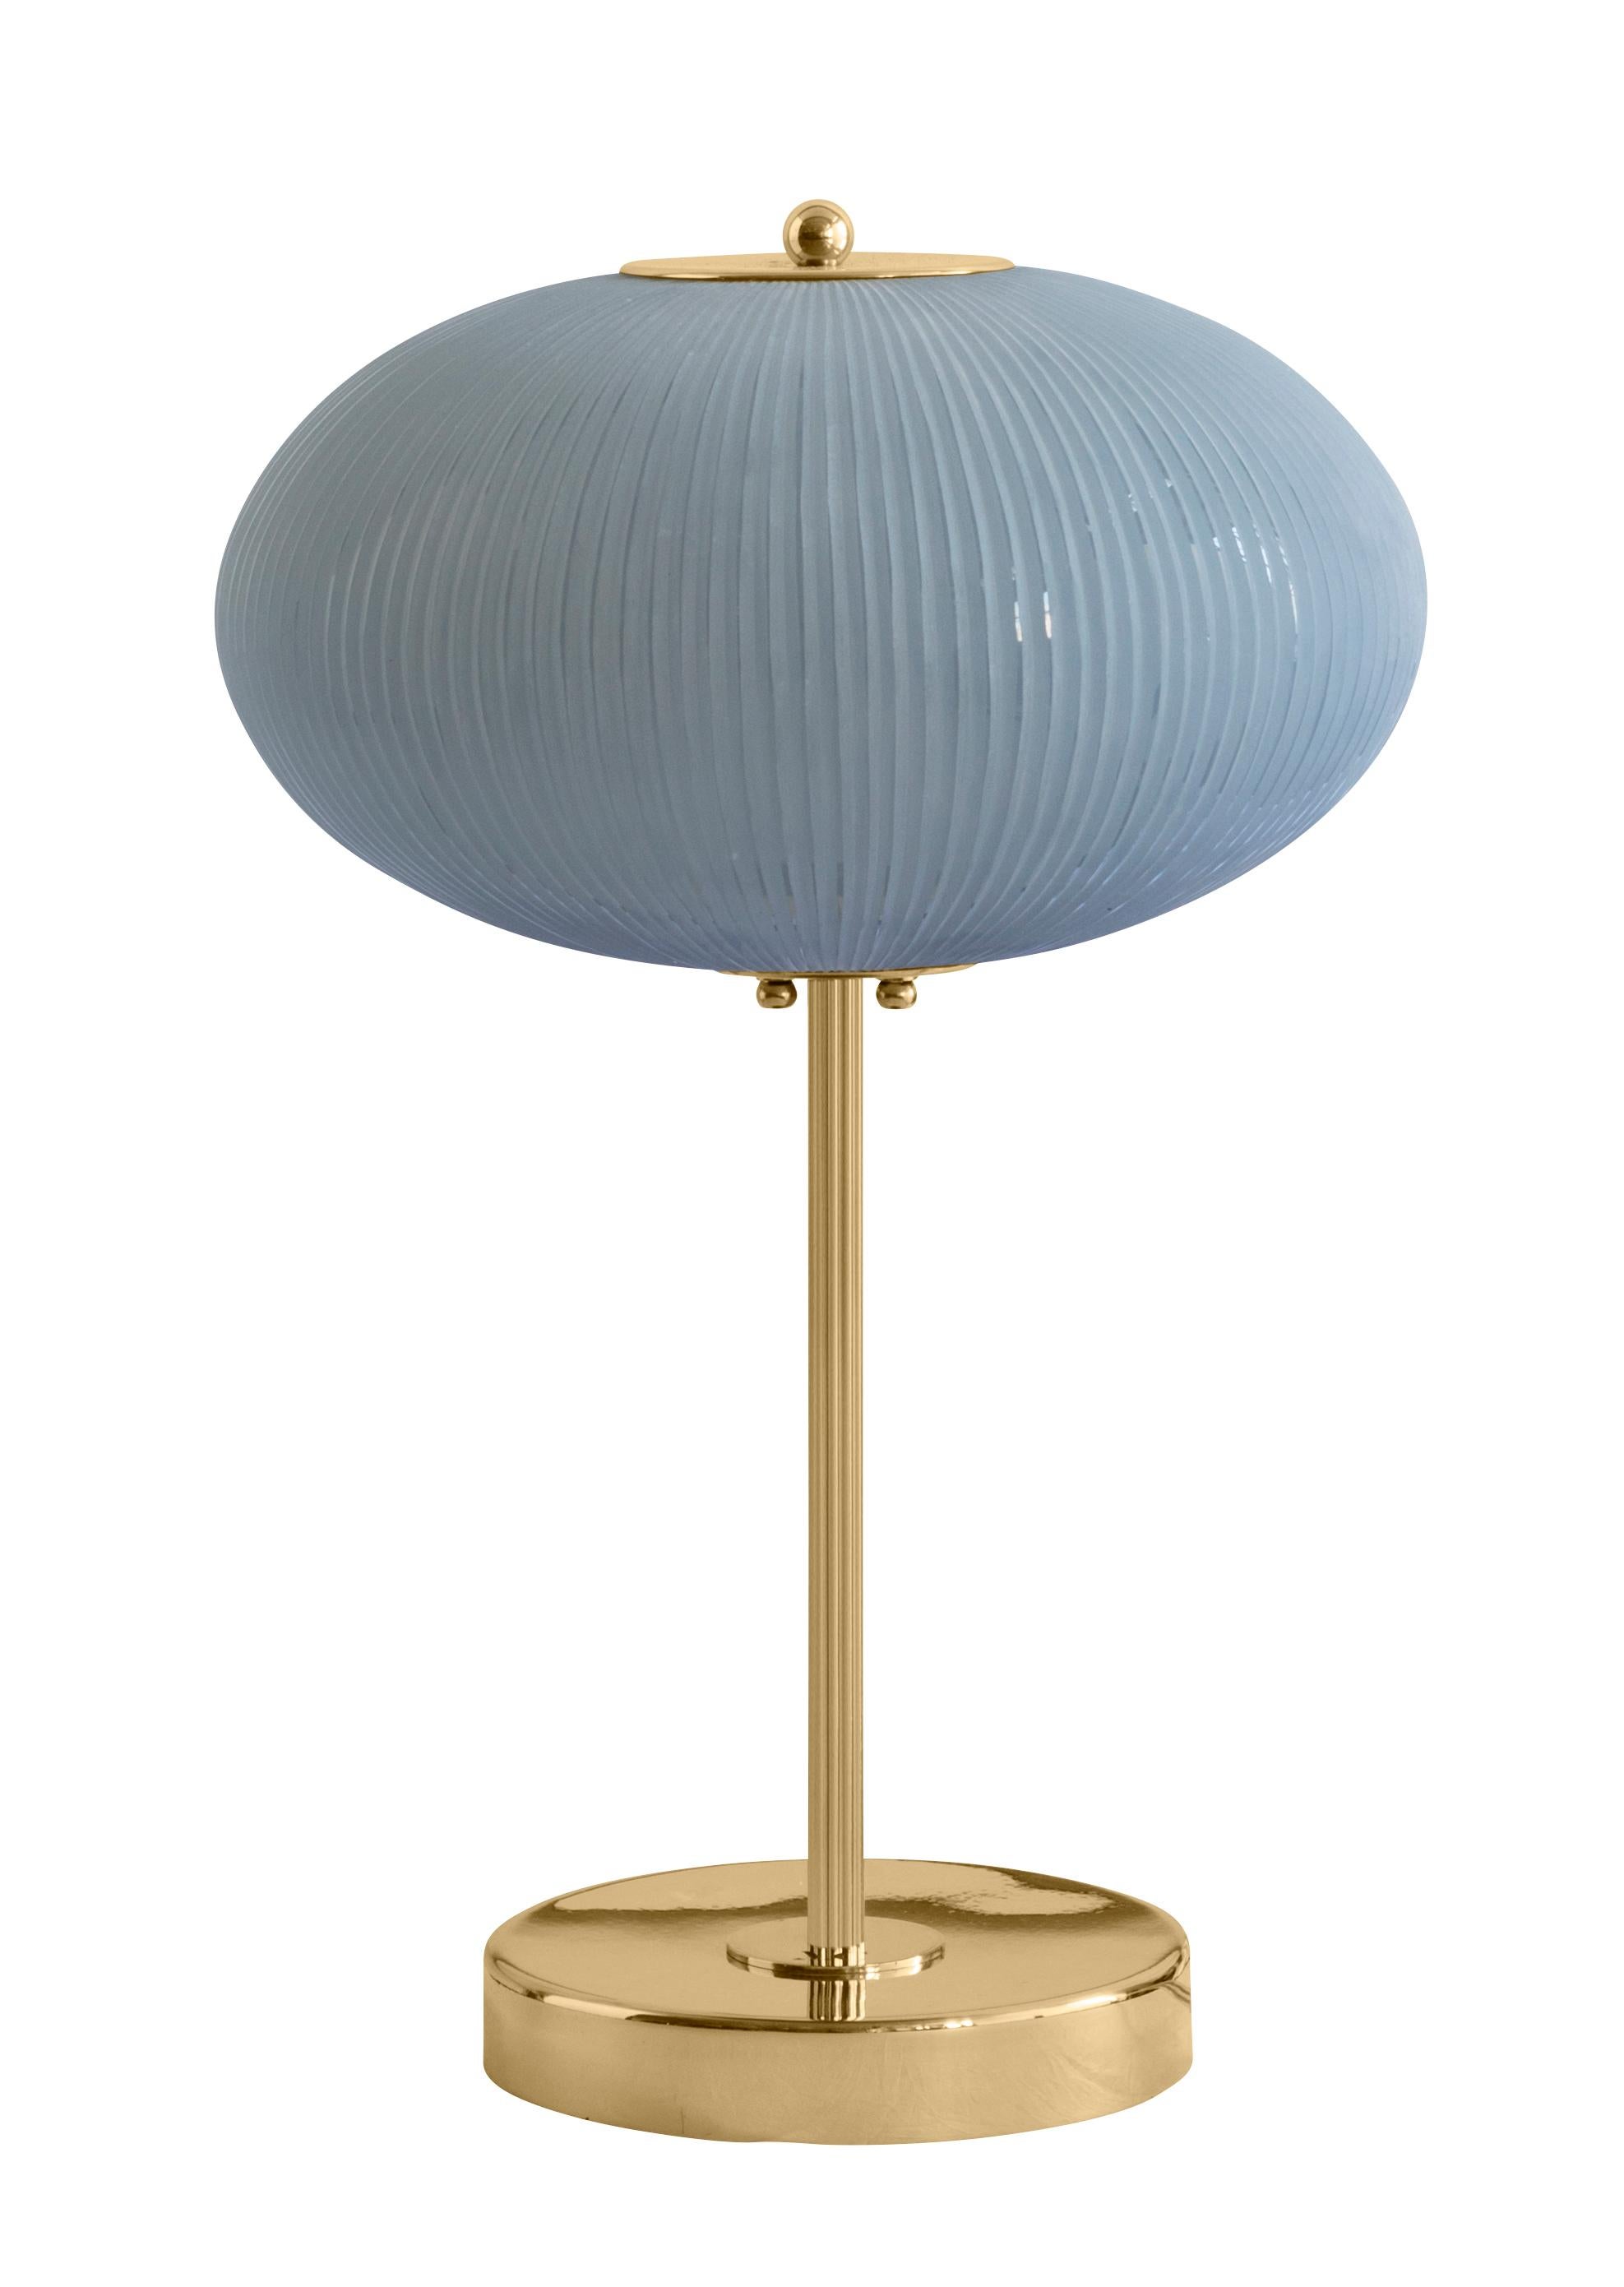 Table lamp China 07 by Magic Circus Editions
Dimensions: H 50 x W 32 x D 32 cm
Materials: Brass, mouth blown glass sculpted with a diamond saw
Colour: opal grey

Available finishes: Brass, nickel
Available colours: enamel soft white, soft